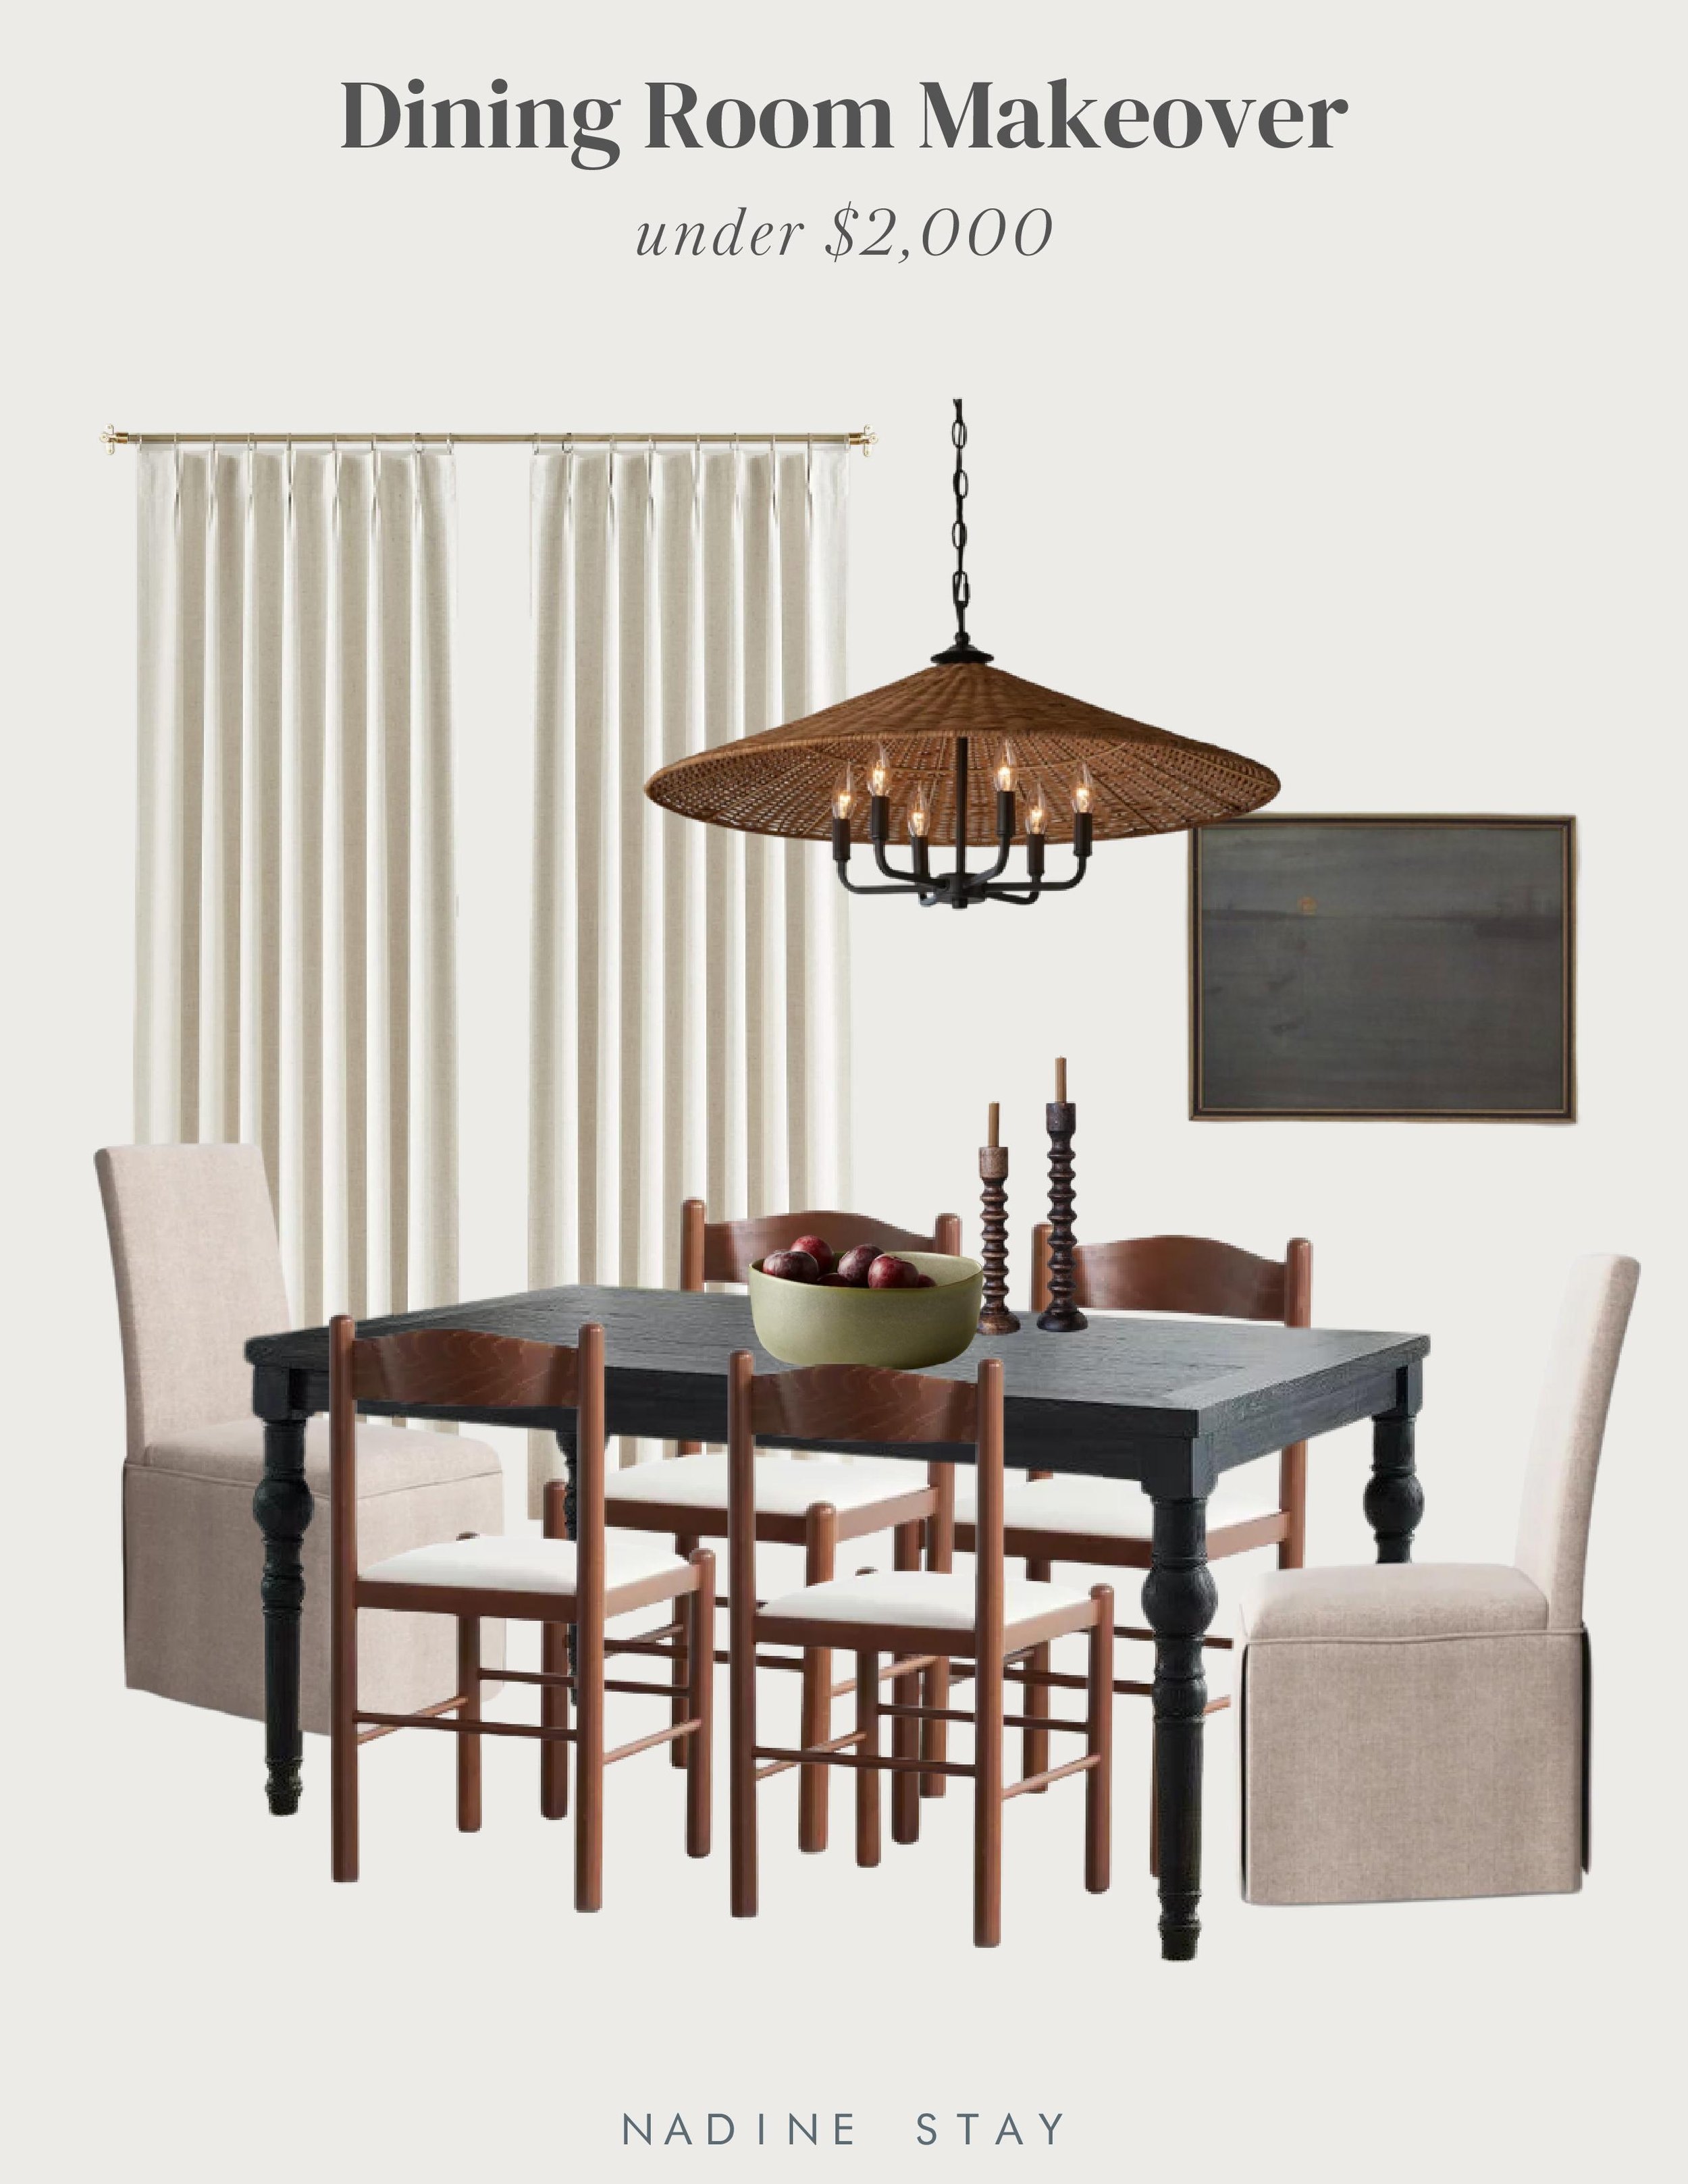 Dining room makeover under $2,000 | How to give your dining room a budget friendly refresh. Black dining table with wood shaker chairs and upholstered parsons chairs. Rattan chandelier and budget friendly pinch pleated curtains. | Nadine Stay